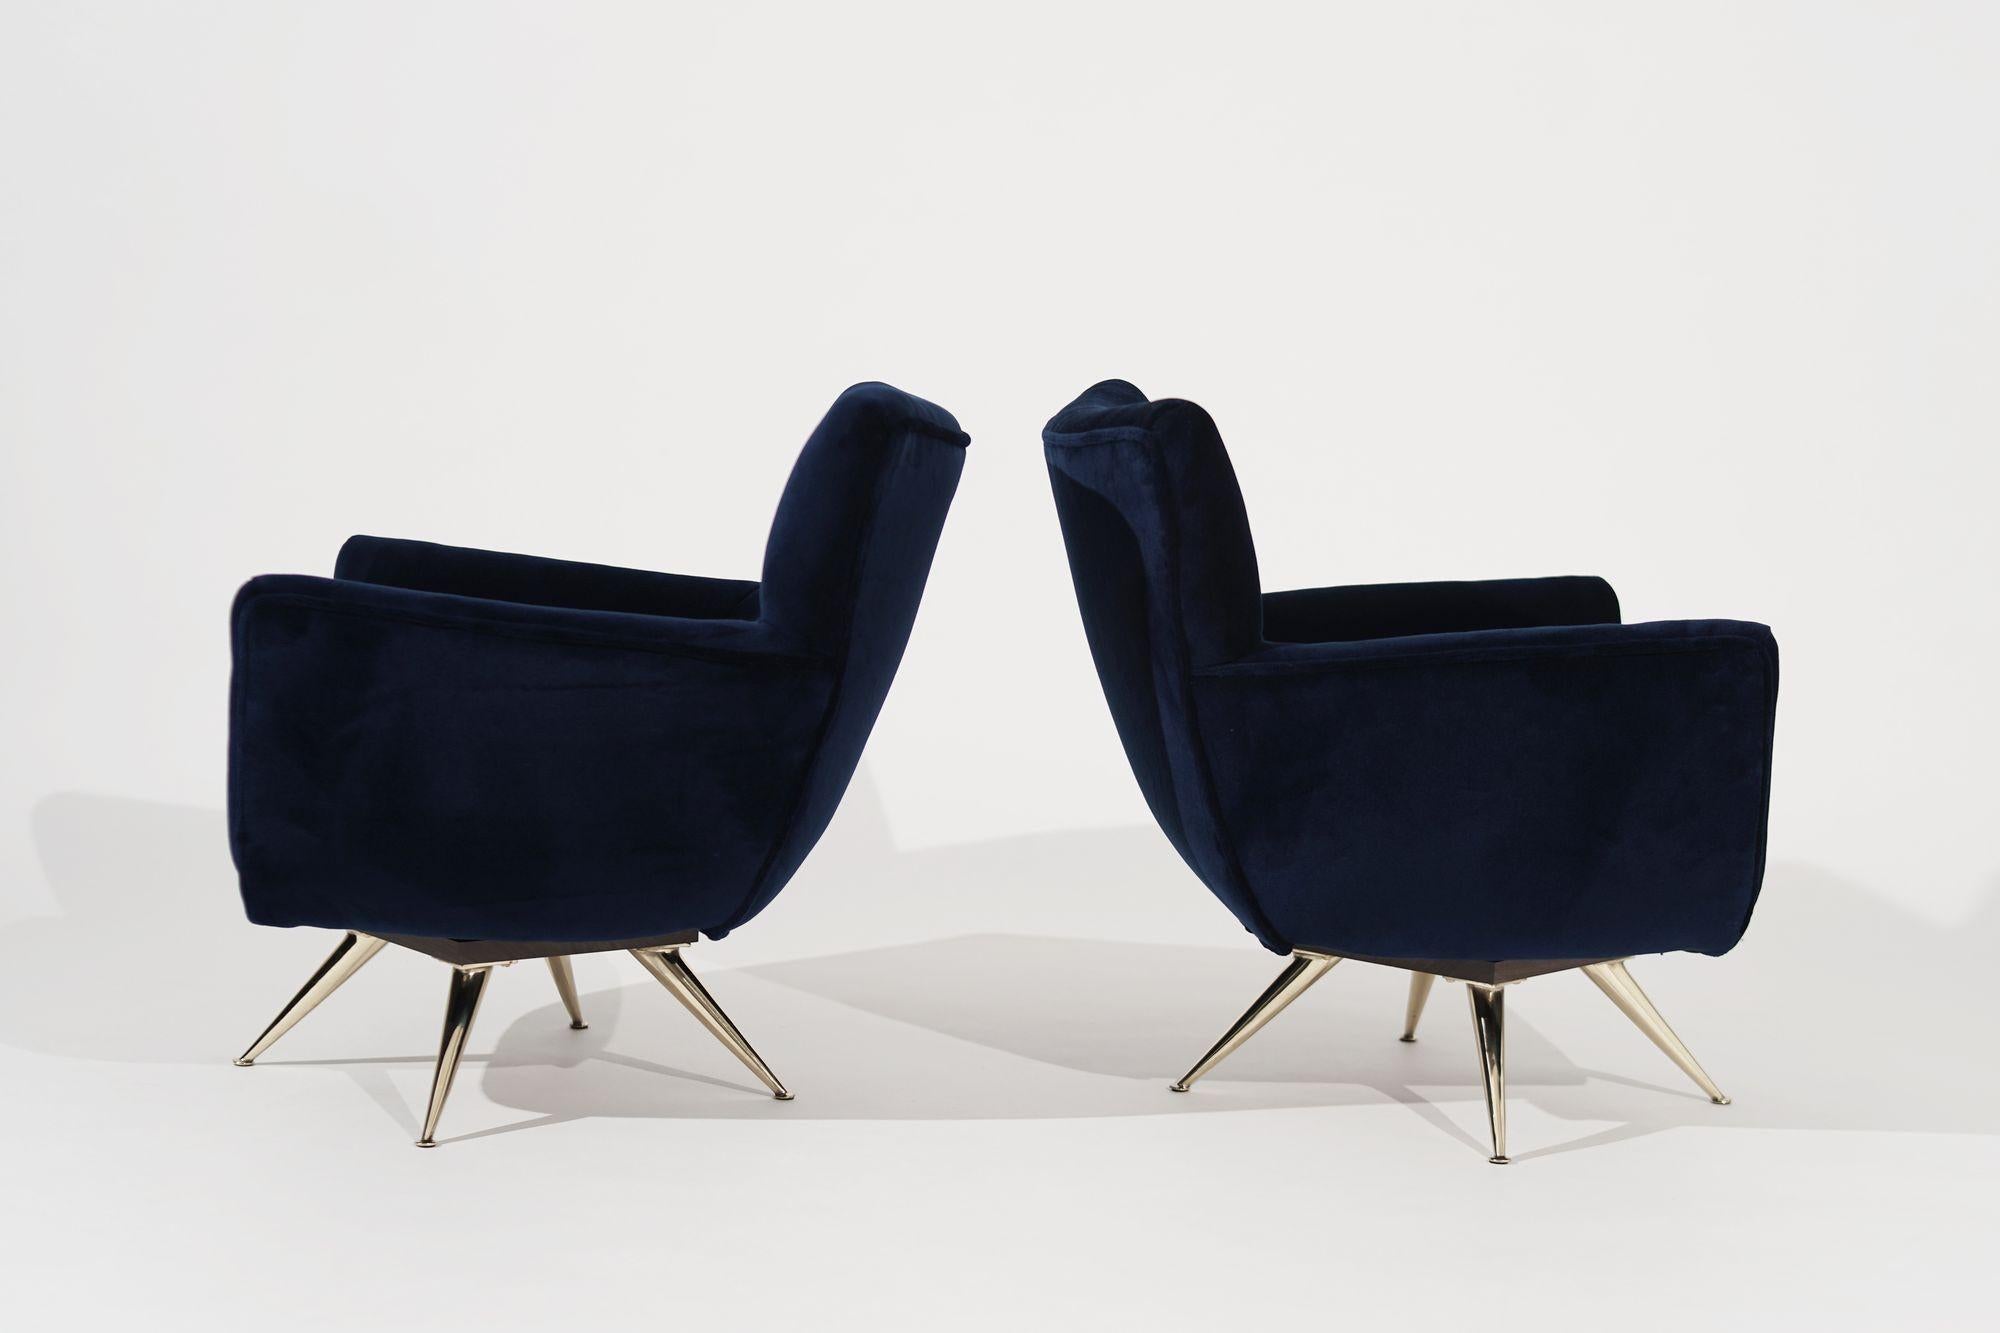 American Set of Curvaceous Swivel Chairs on Brass Legs by Henry Glass